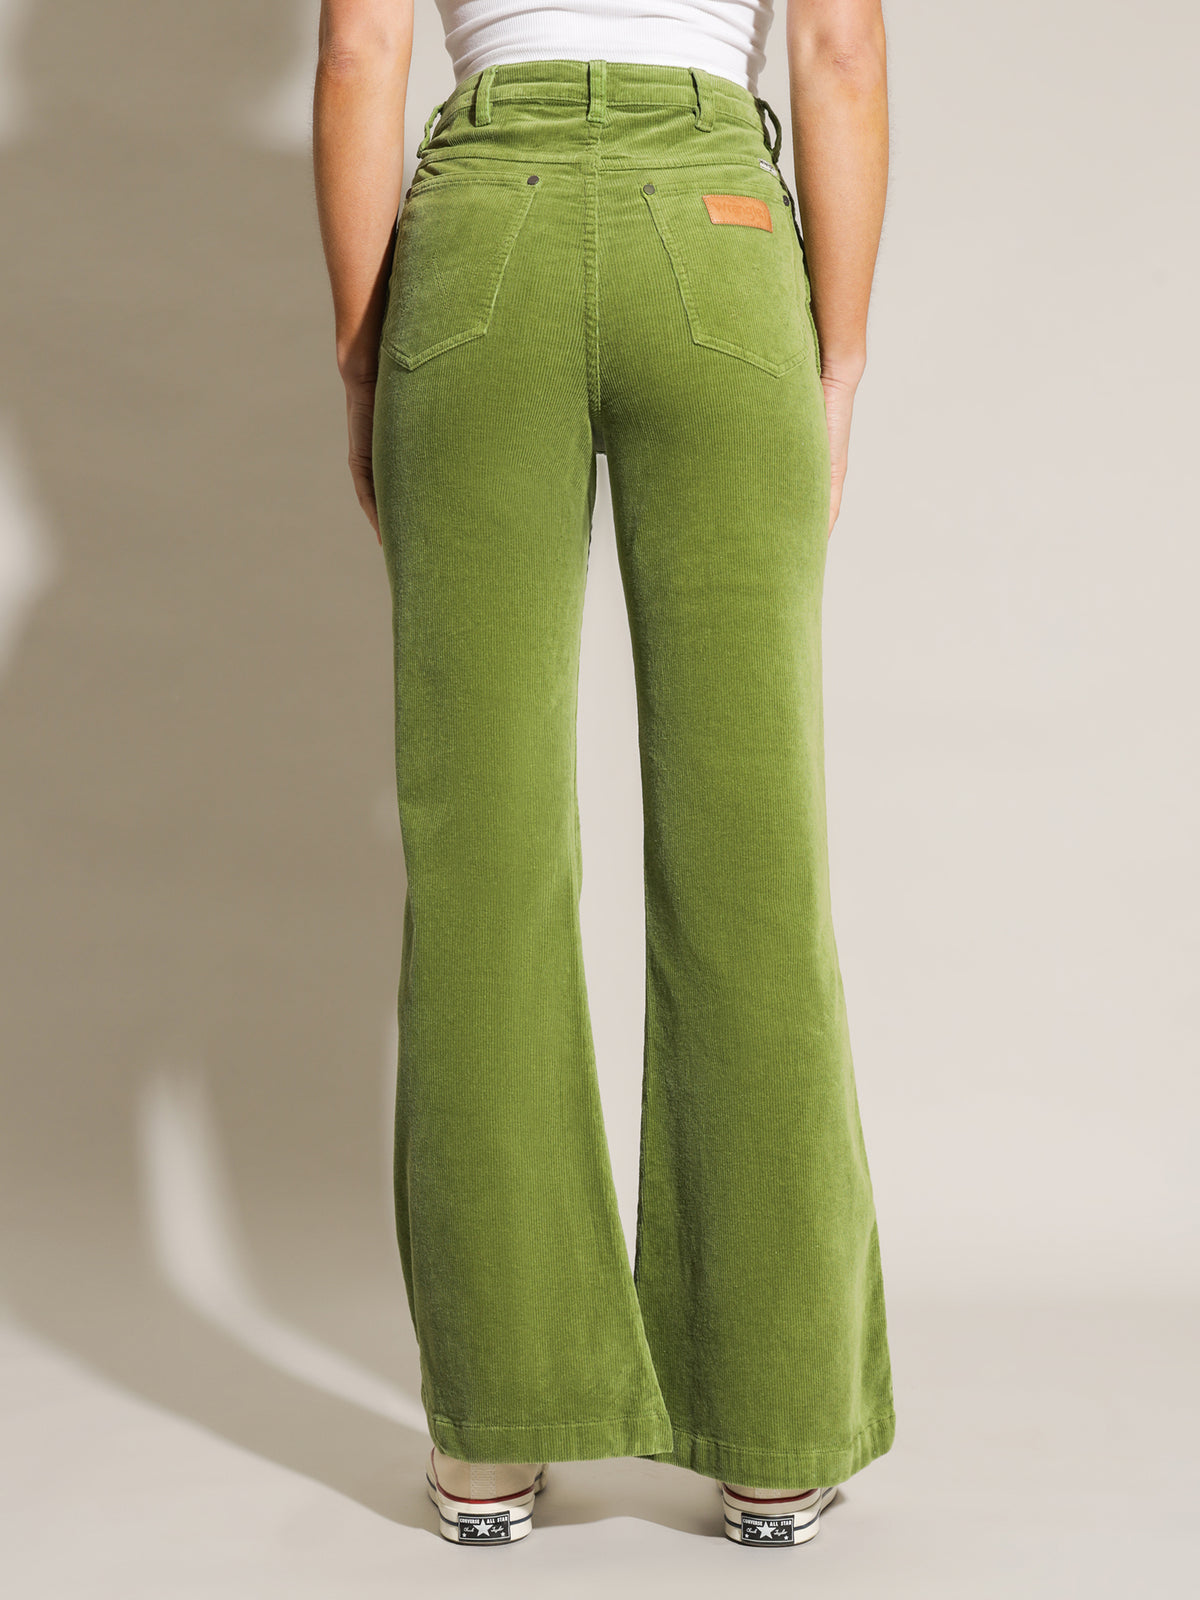 Lou Lou Bells in Lime Cord